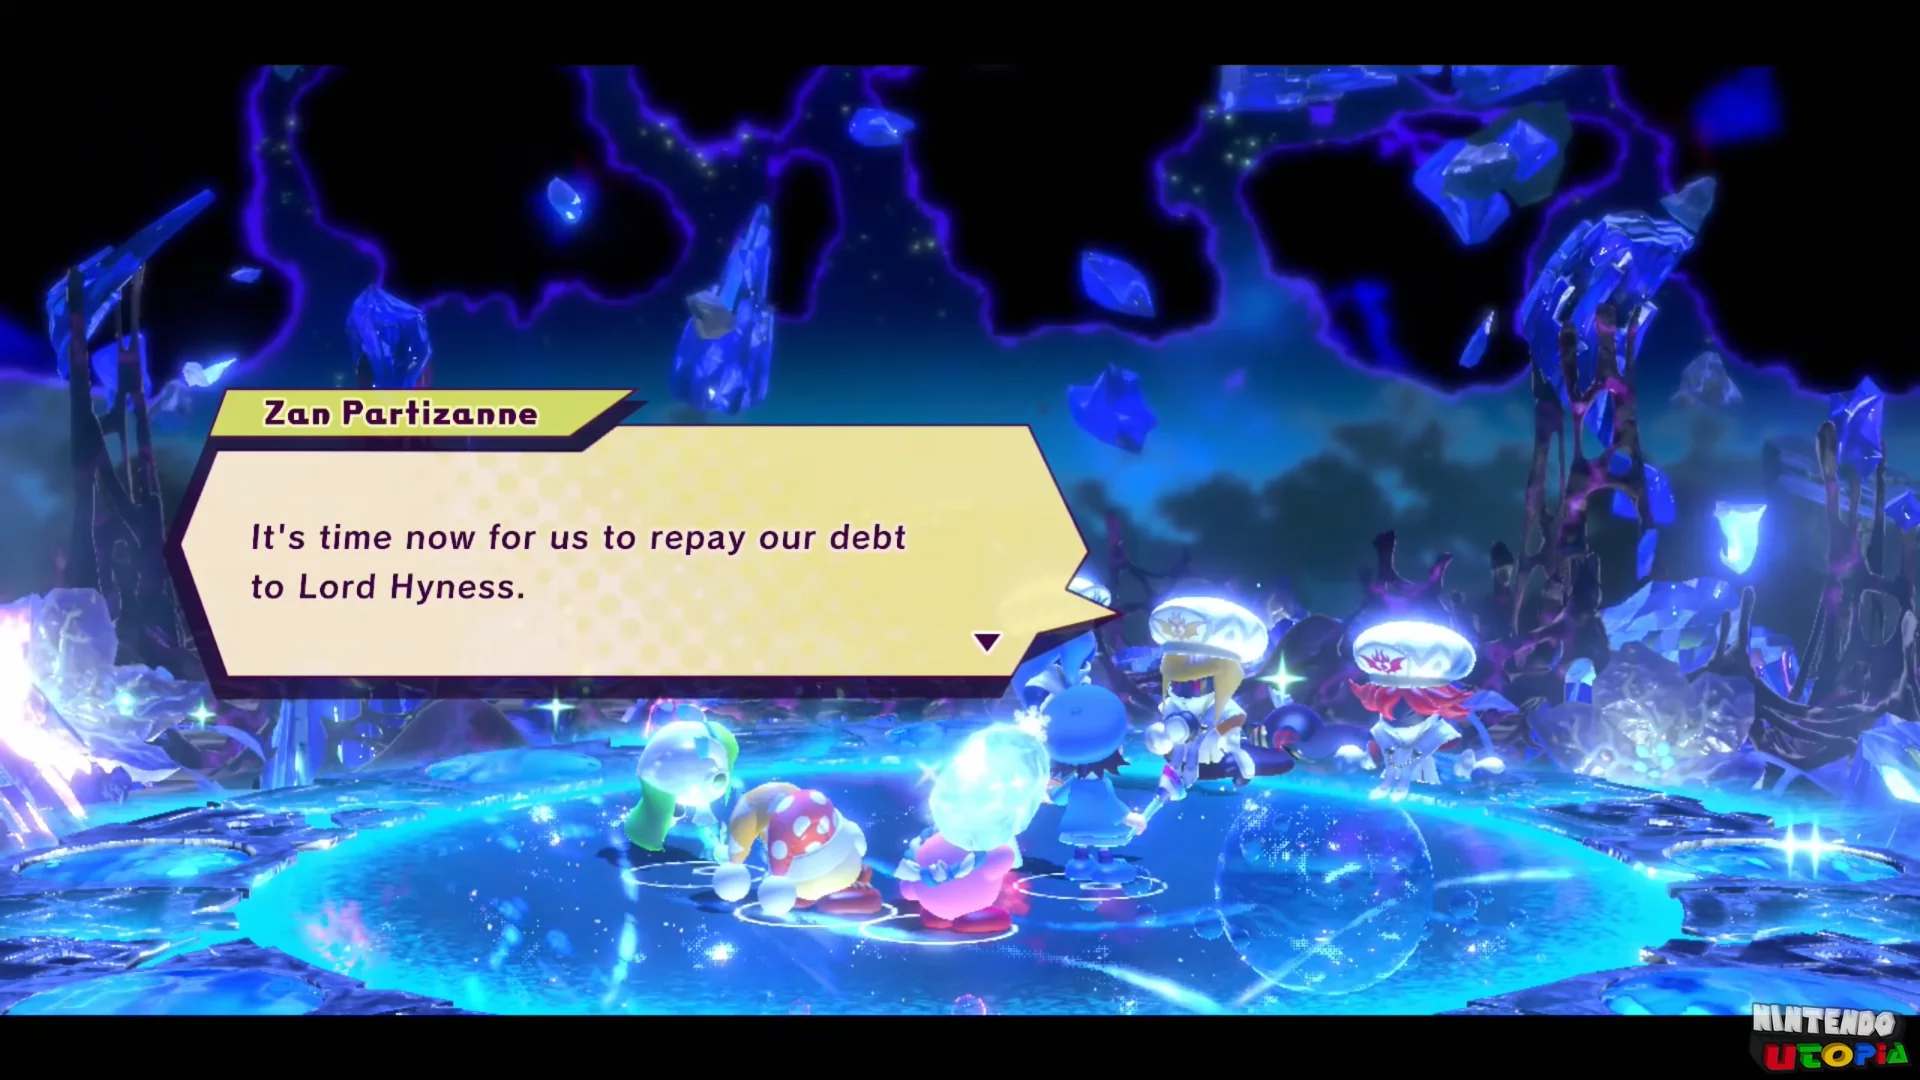 Zan Partizanne text box: It's time now for us to repay our debt to Lord Hyness.